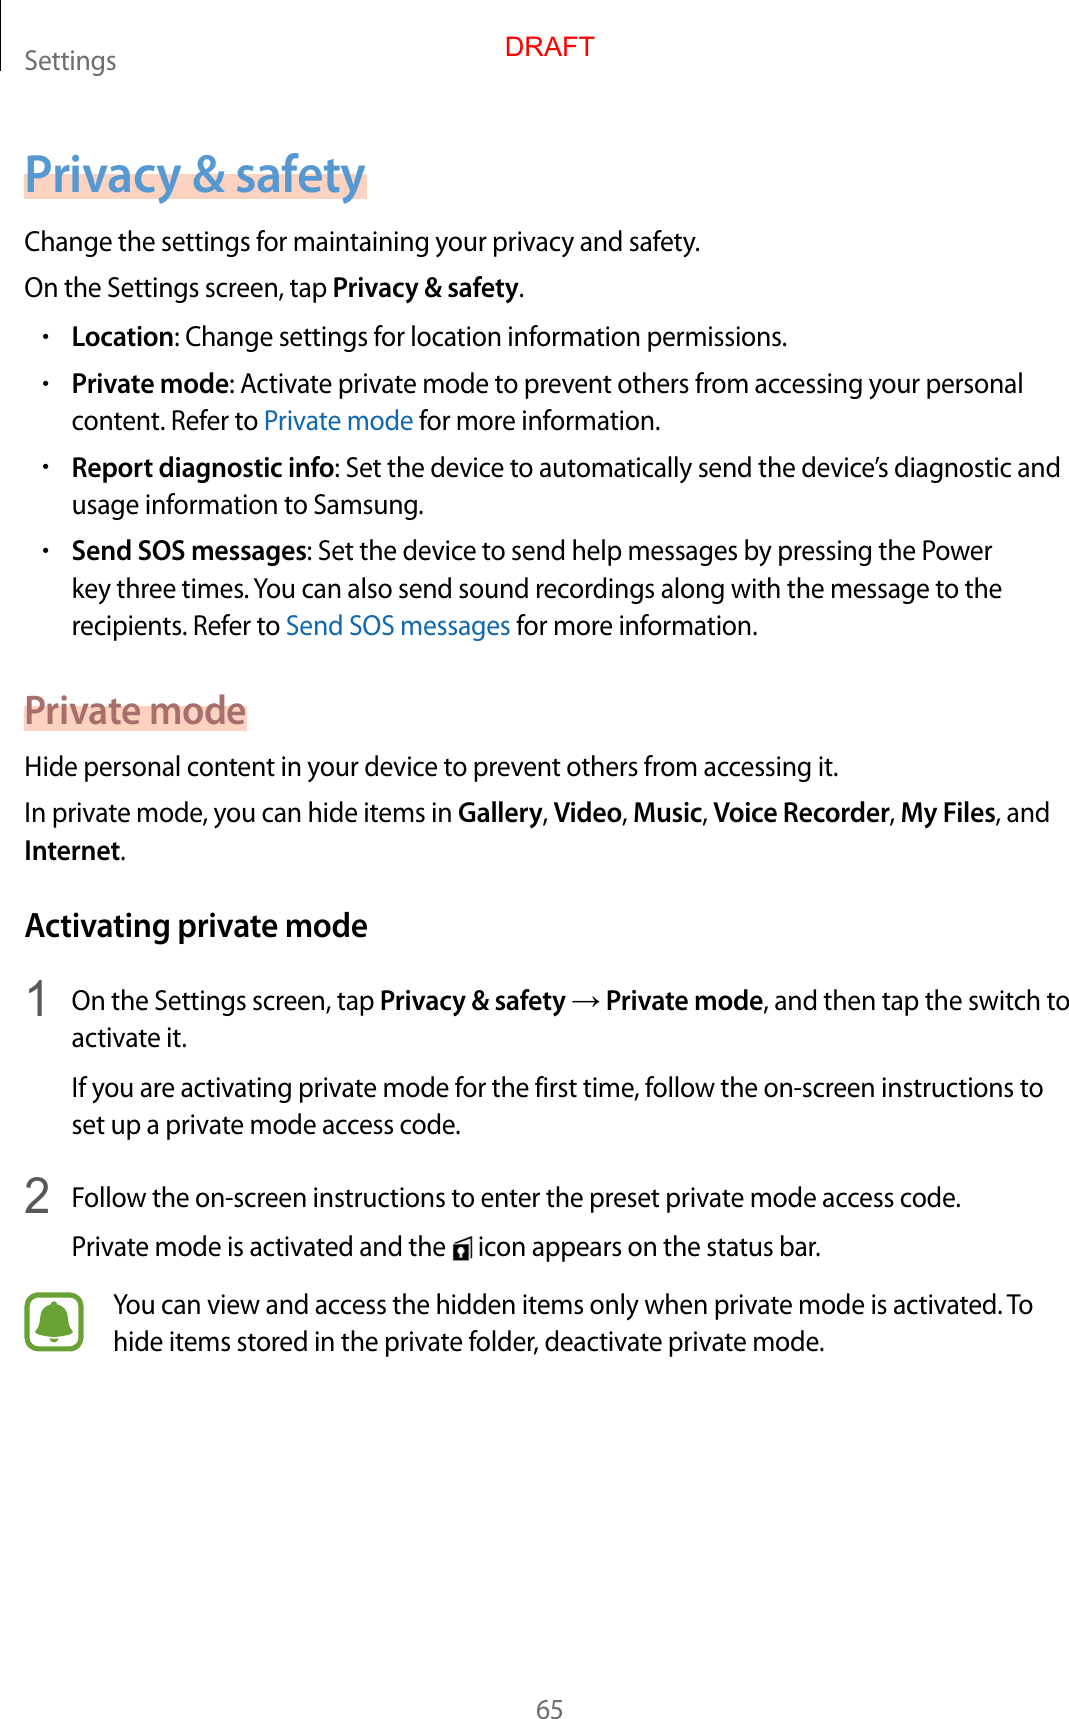 Settings65Privacy &amp; safetyChange the settings for maintaining your privacy and safety.On the Settings screen, tap Privacy &amp; safety.•Location: Change settings for location information permissions.•Private mode: Activate private mode to prevent others from accessing your personal content. Refer to Private mode for more information.•Report diagnostic info: Set the device to automatically send the device’s diagnostic and usage information to Samsung.•Send SOS messages: Set the device to send help messages by pressing the Power key three times. You can also send sound recordings along with the message to the recipients. Refer to Send SOS messages for more information.Private modeHide personal content in your device to prevent others from accessing it.In private mode, you can hide items in Gallery, Video, Music, Voice Recorder, My Files, and Internet.Activating private mode1  On the Settings screen, tap Privacy &amp; safety → Private mode, and then tap the switch to activate it.If you are activating private mode for the first time, follow the on-screen instructions to set up a private mode access code.2  Follow the on-screen instructions to enter the preset private mode access code.Private mode is activated and the   icon appears on the status bar.You can view and access the hidden items only when private mode is activated. To hide items stored in the private folder, deactivate private mode.DRAFT